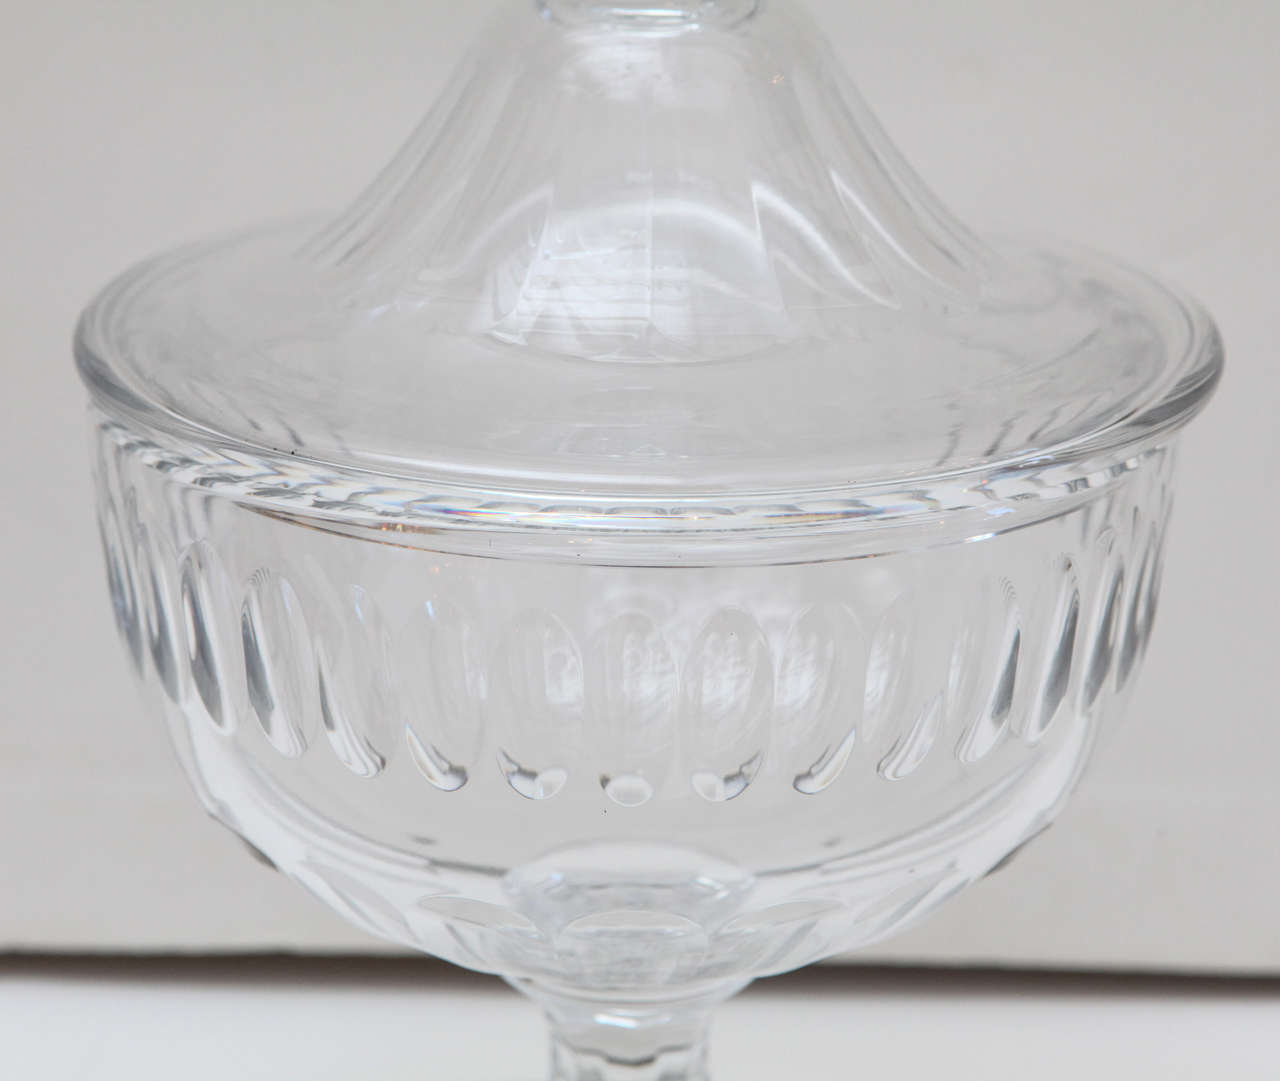 20th Century Limited Edition, Baccarat Candy Dish, circa 1910